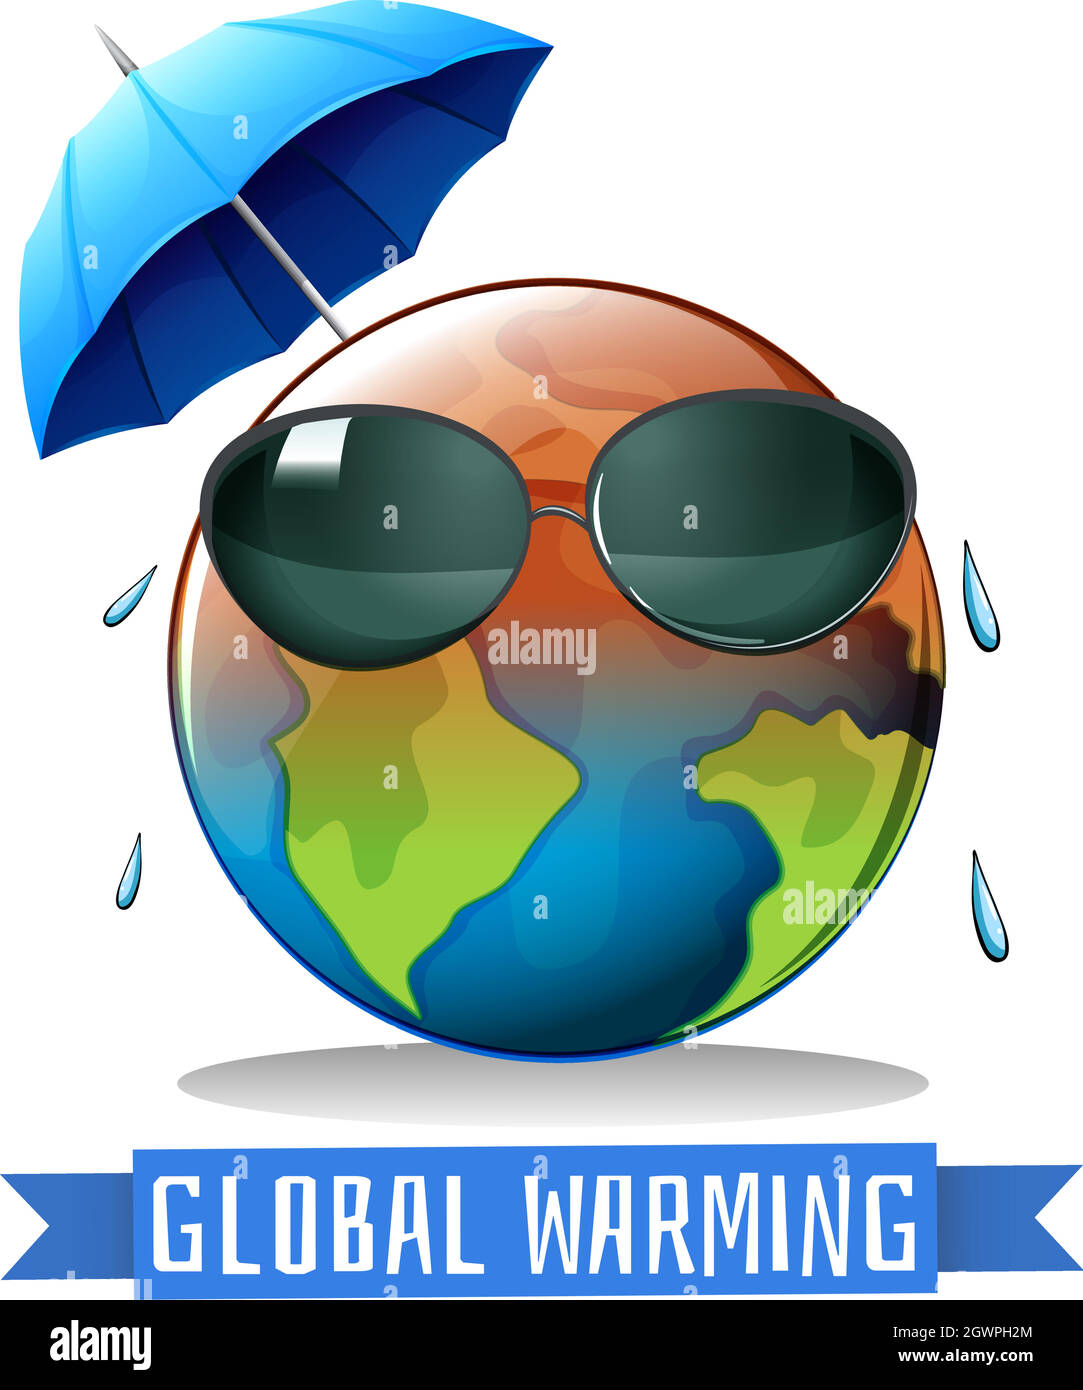 Global warming with earth and umbrella Stock Vector